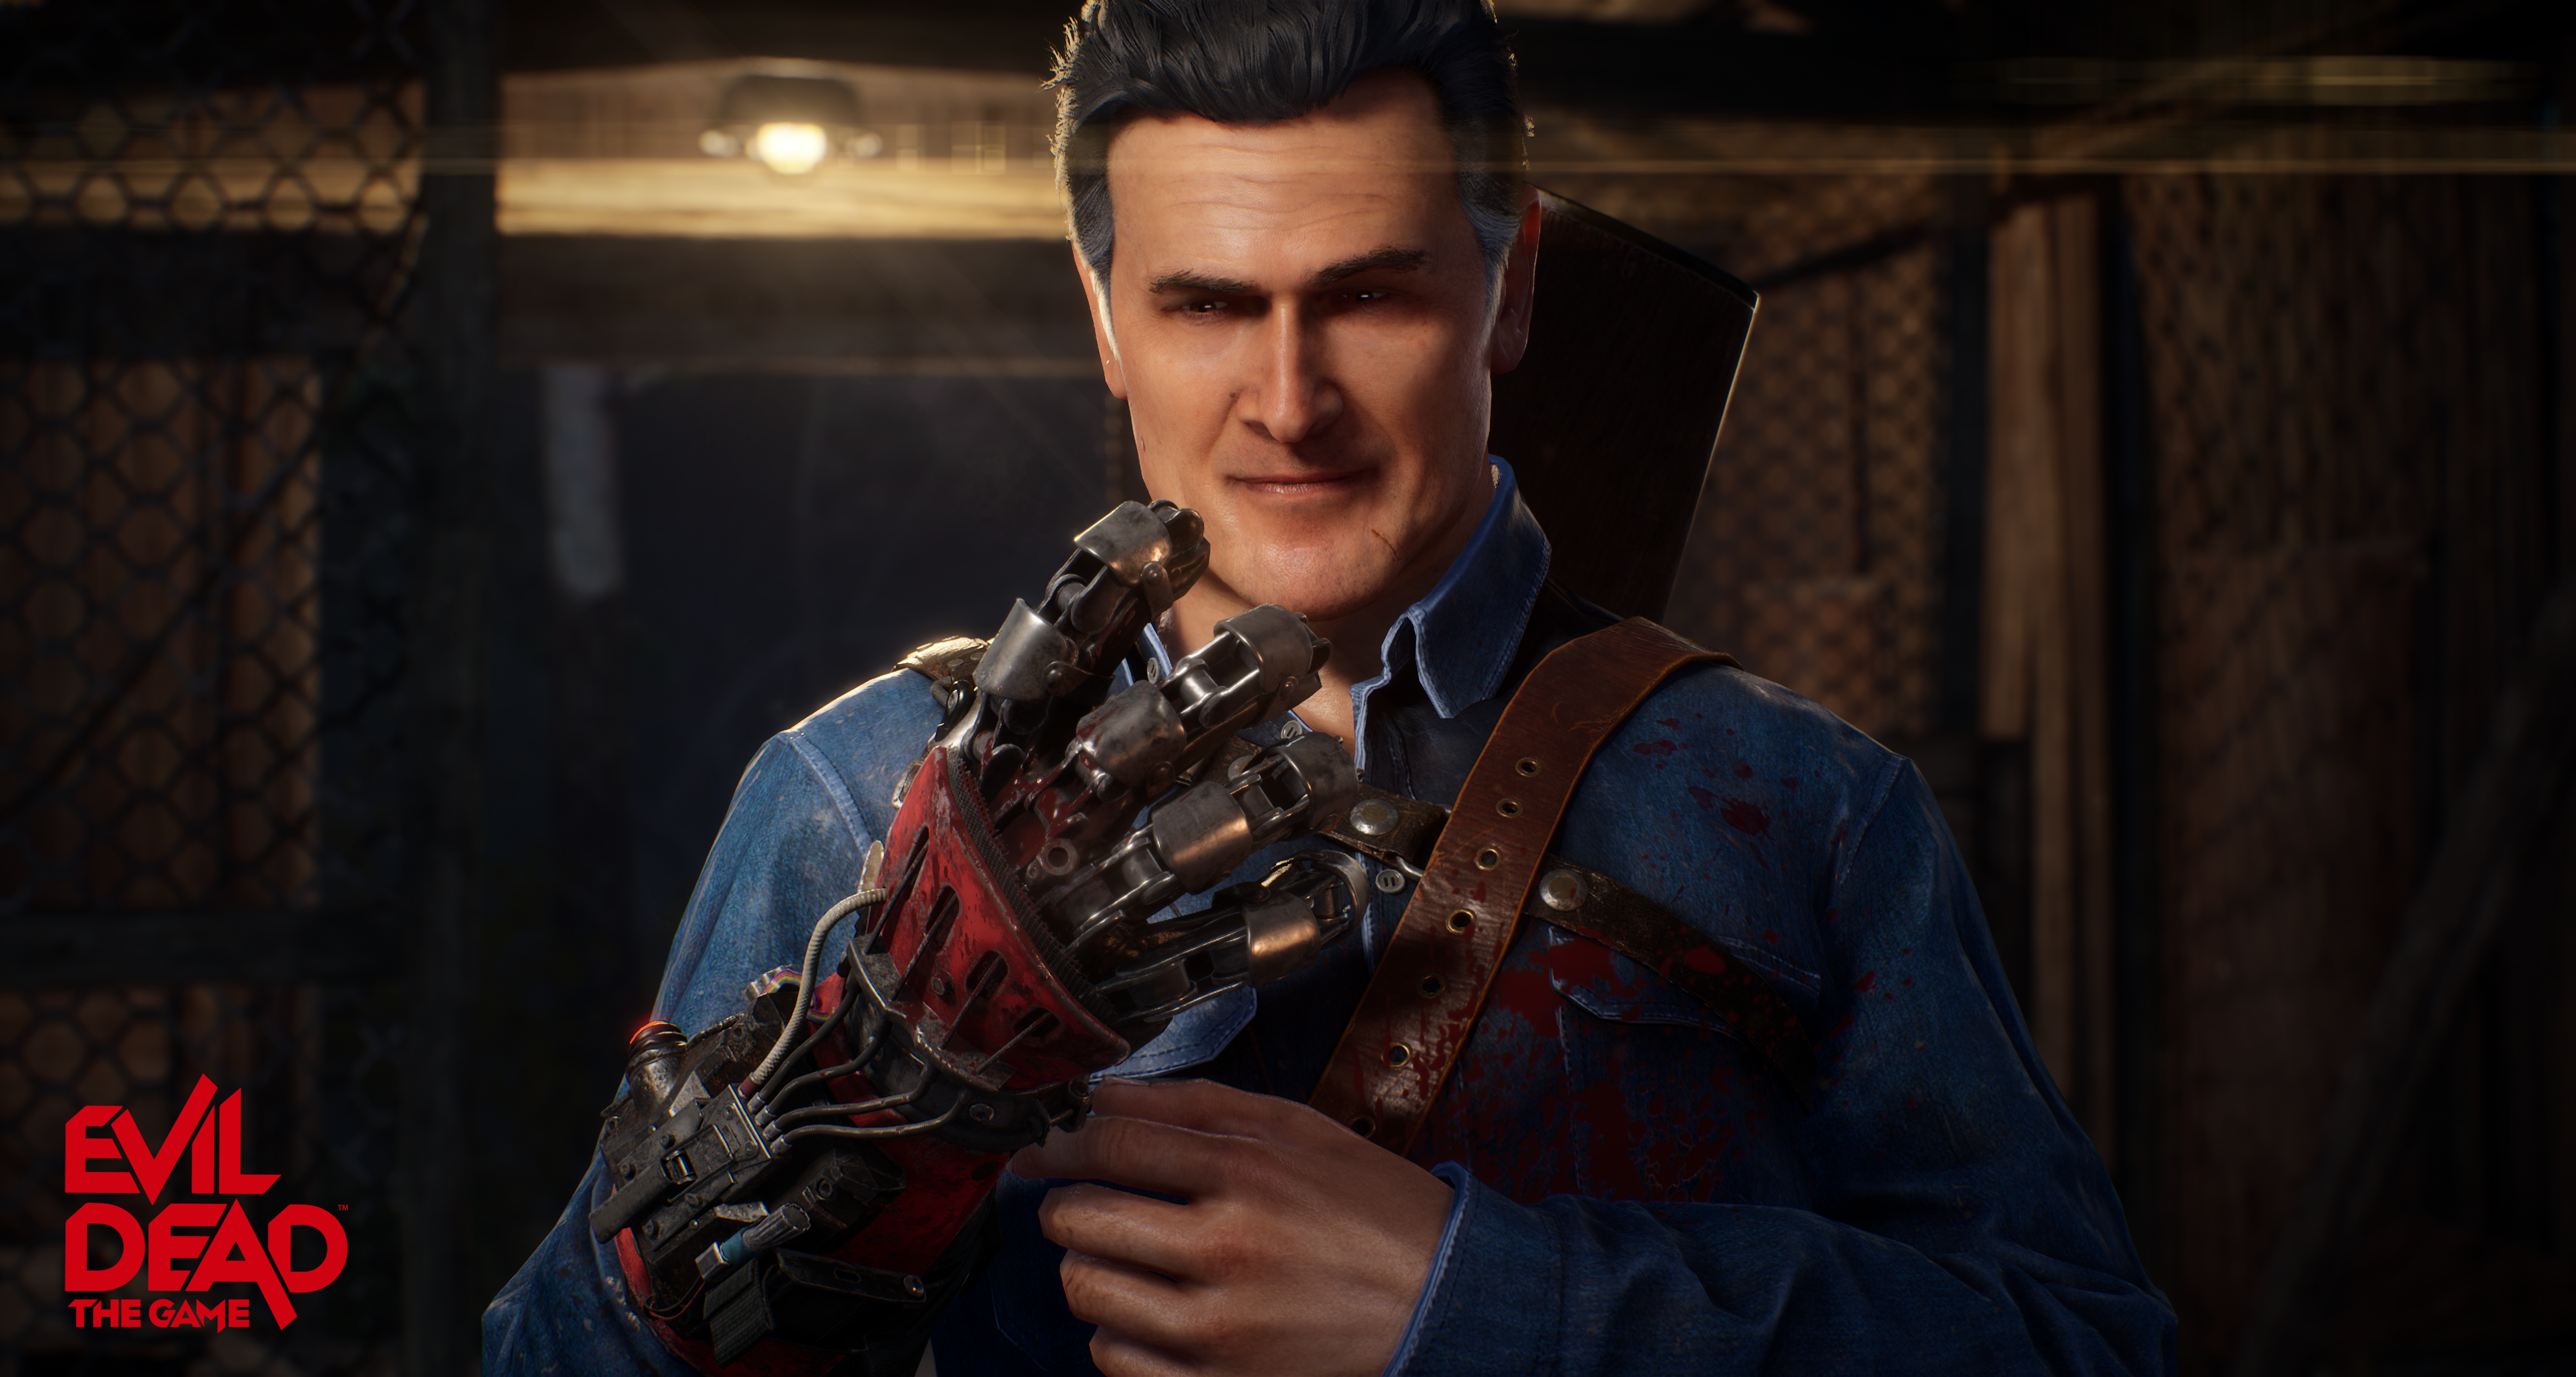 Evil Dead: The Game Review – A Little Rough Around the Edges